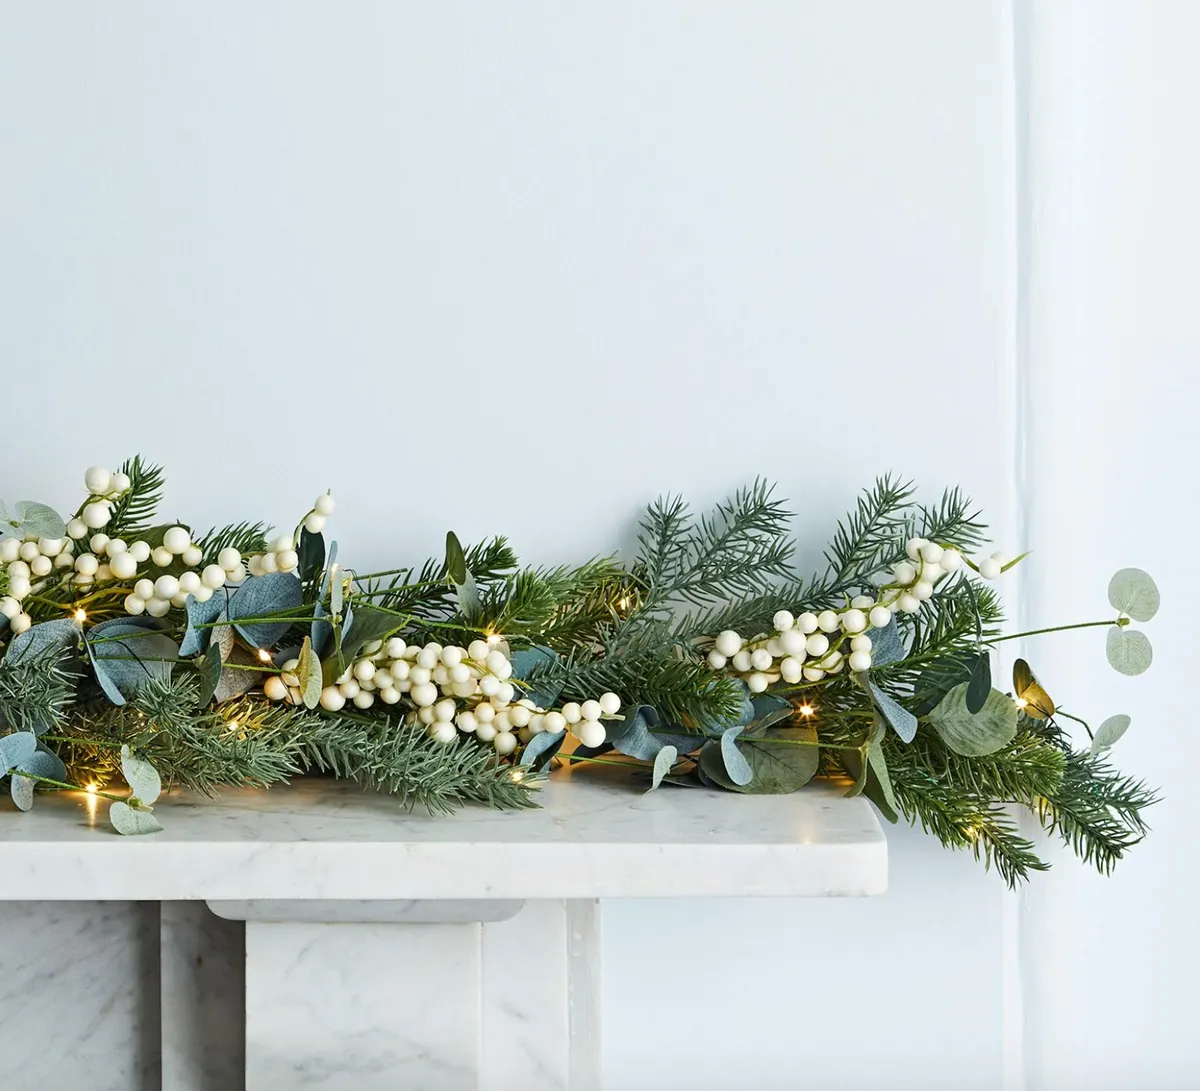 Eucalyptus & White Berry Christmas Garland with Lights from Lights 4 Fun